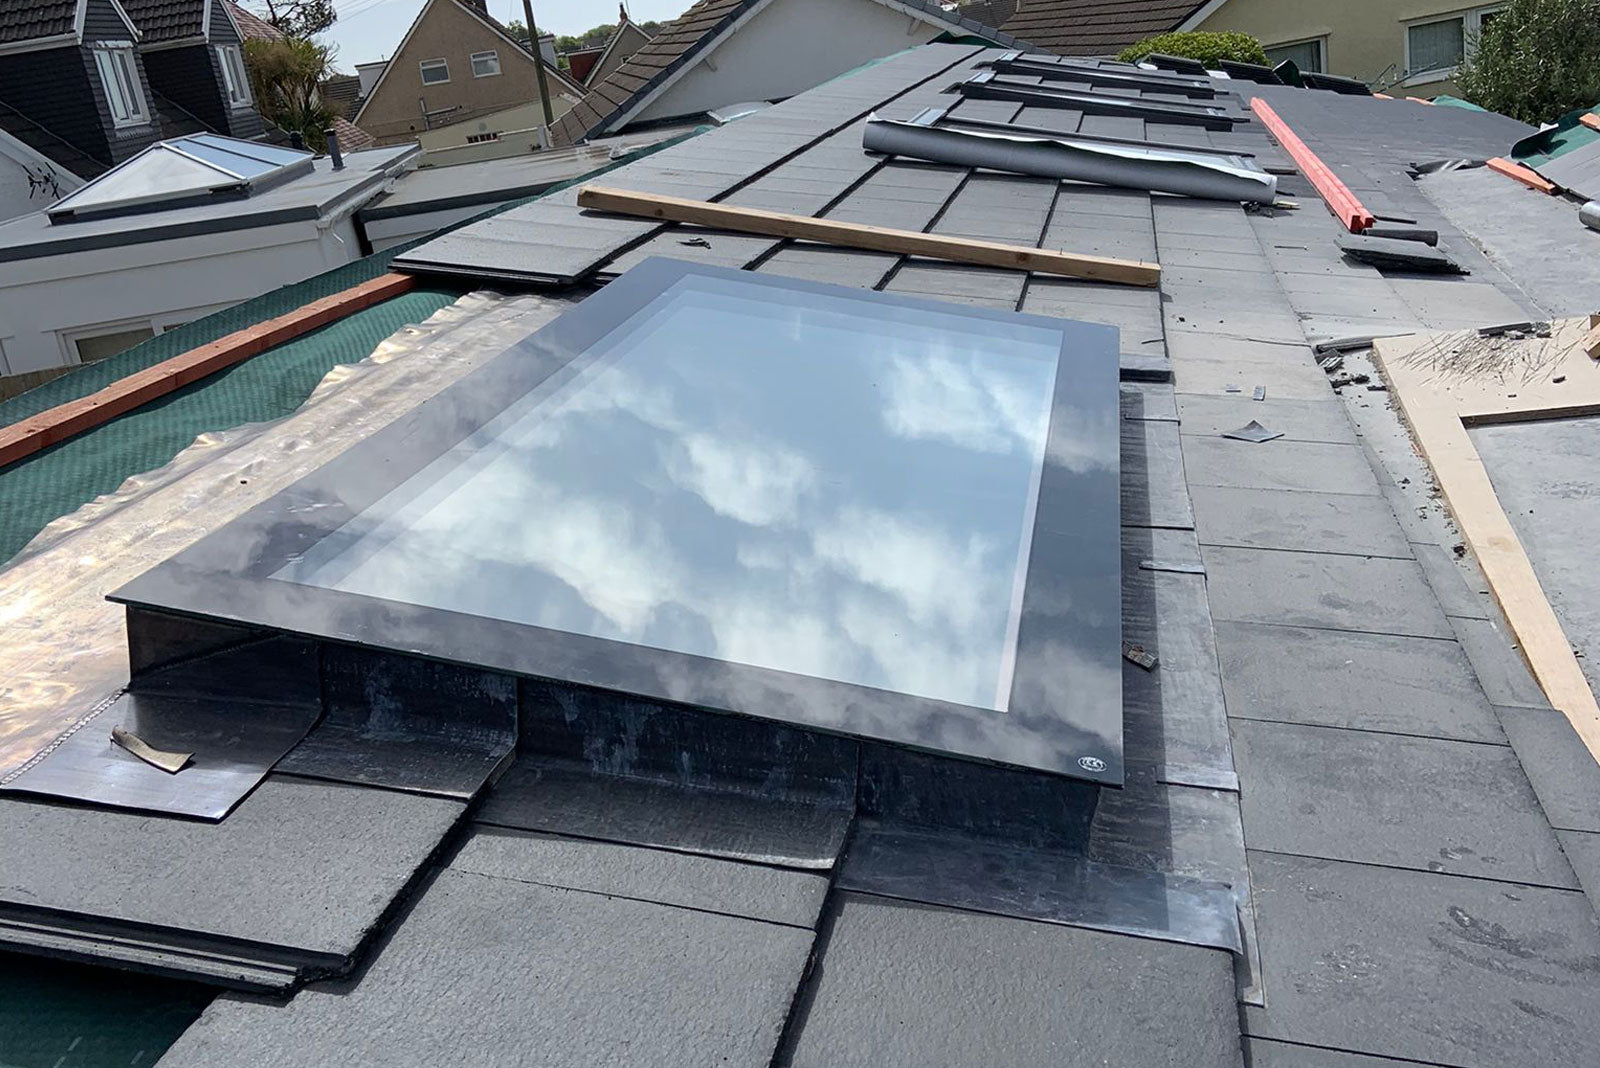 Pitched Roof Skylight 1000 x 2000mm